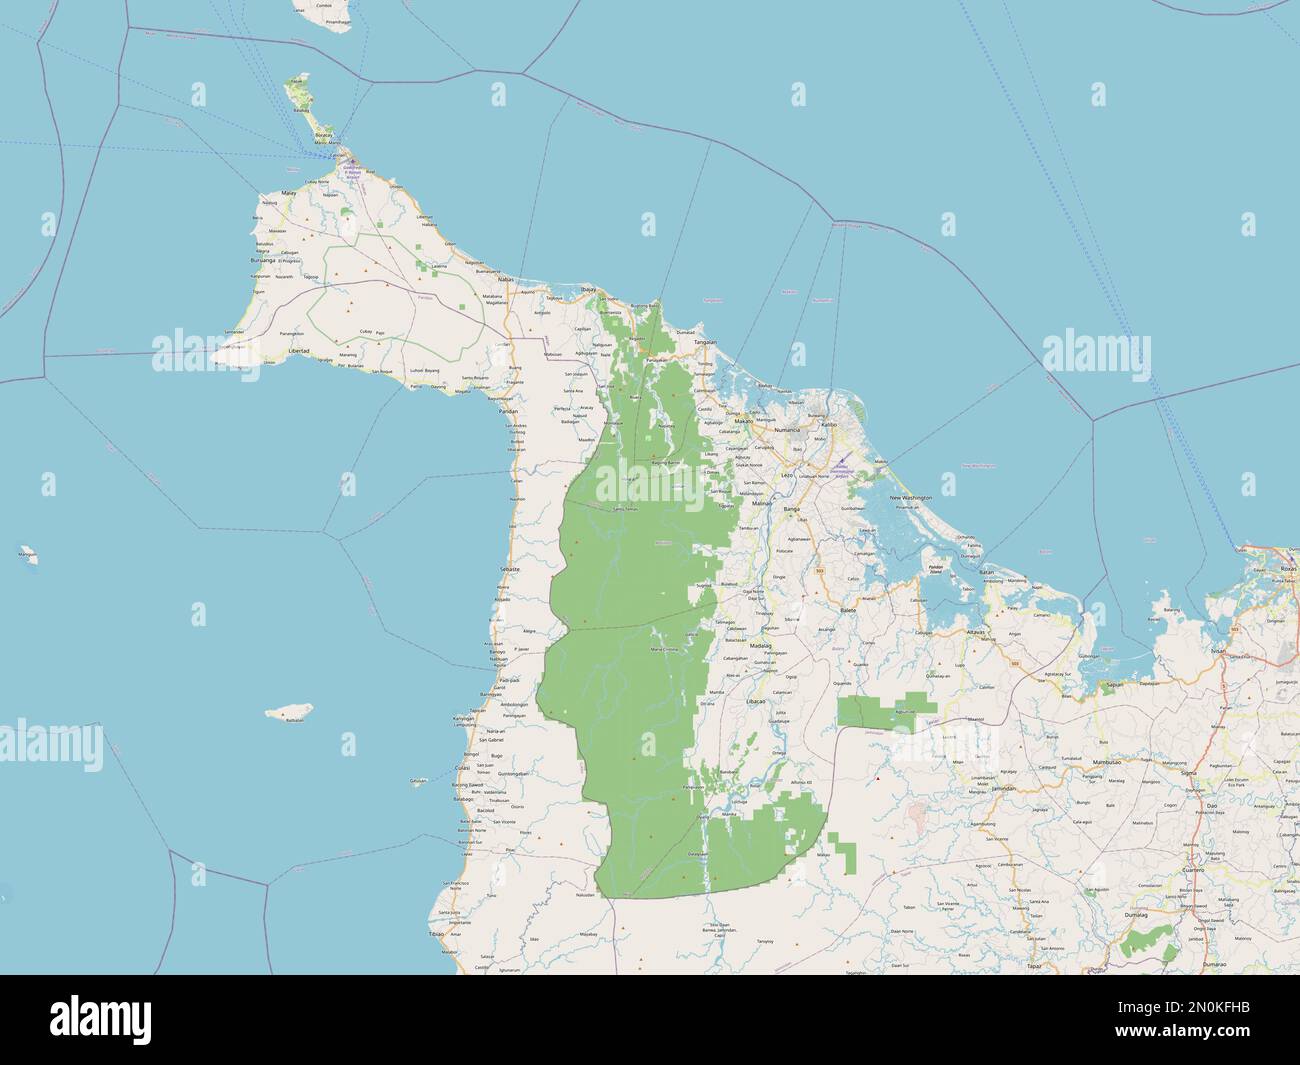 Aklan, province of Philippines. Open Street Map Stock Photo